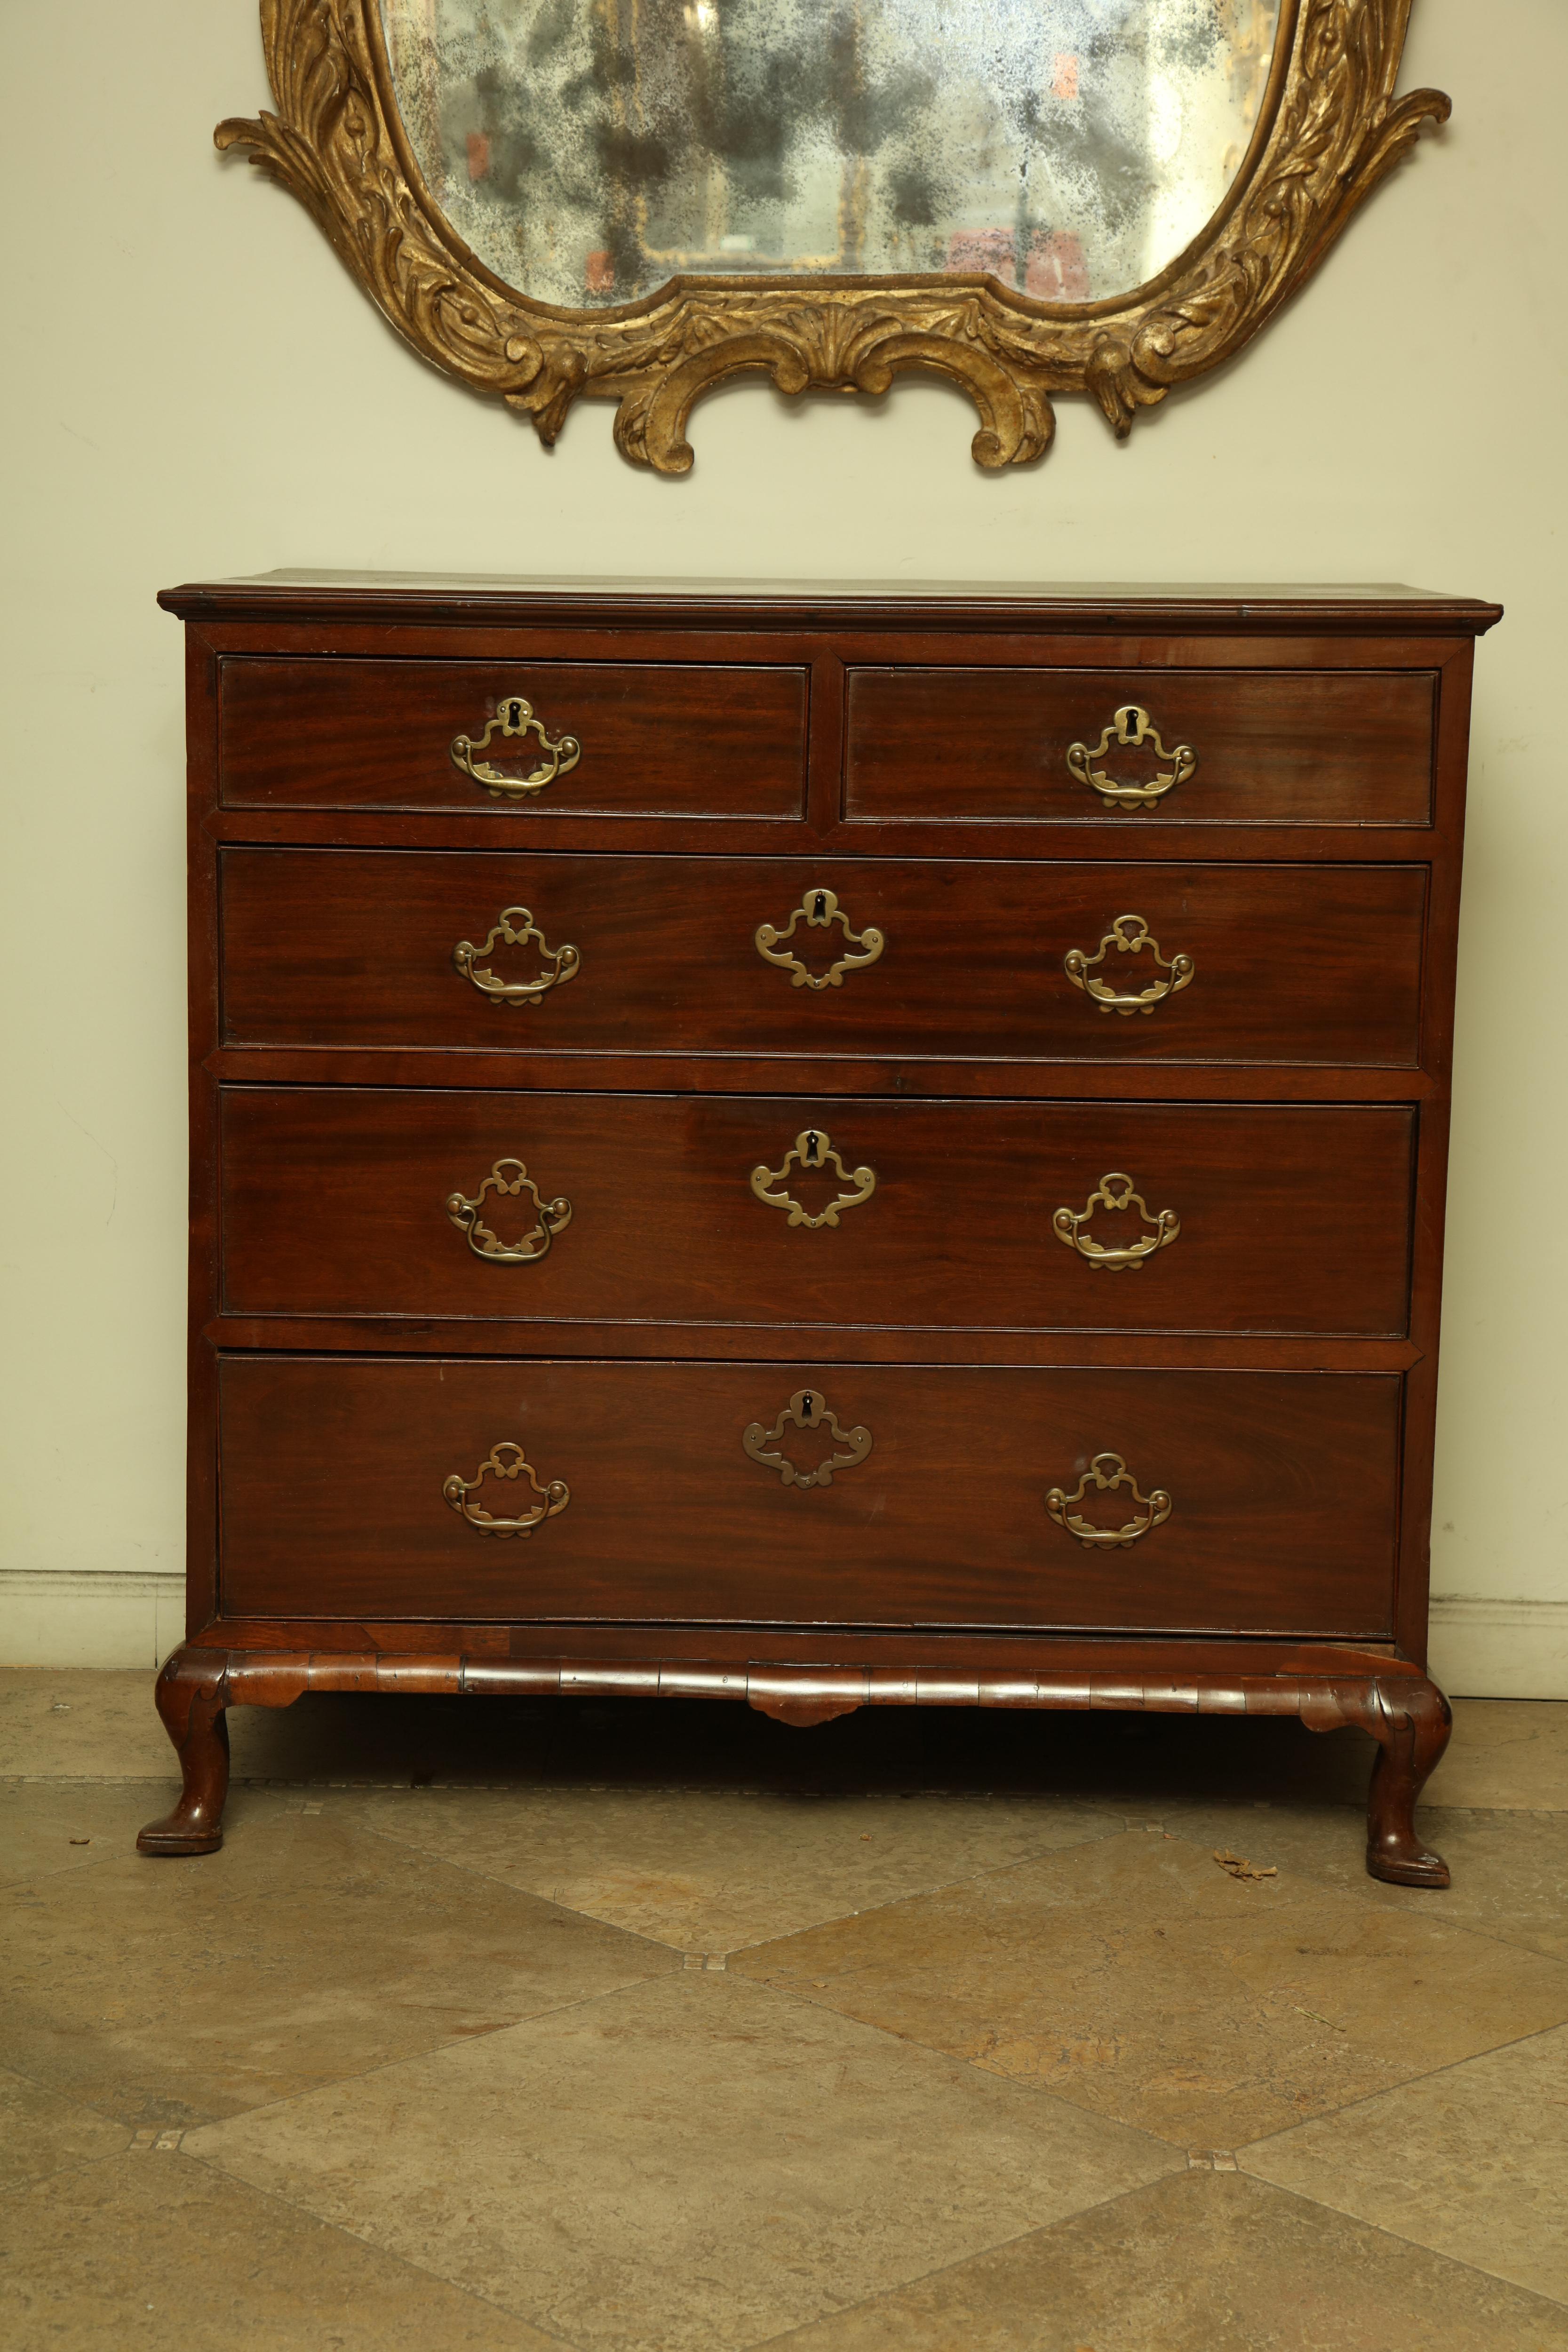 A fine English Queen Anne mahogany five-drawer chest with brass pulls and cabriole legs and slipper feet.